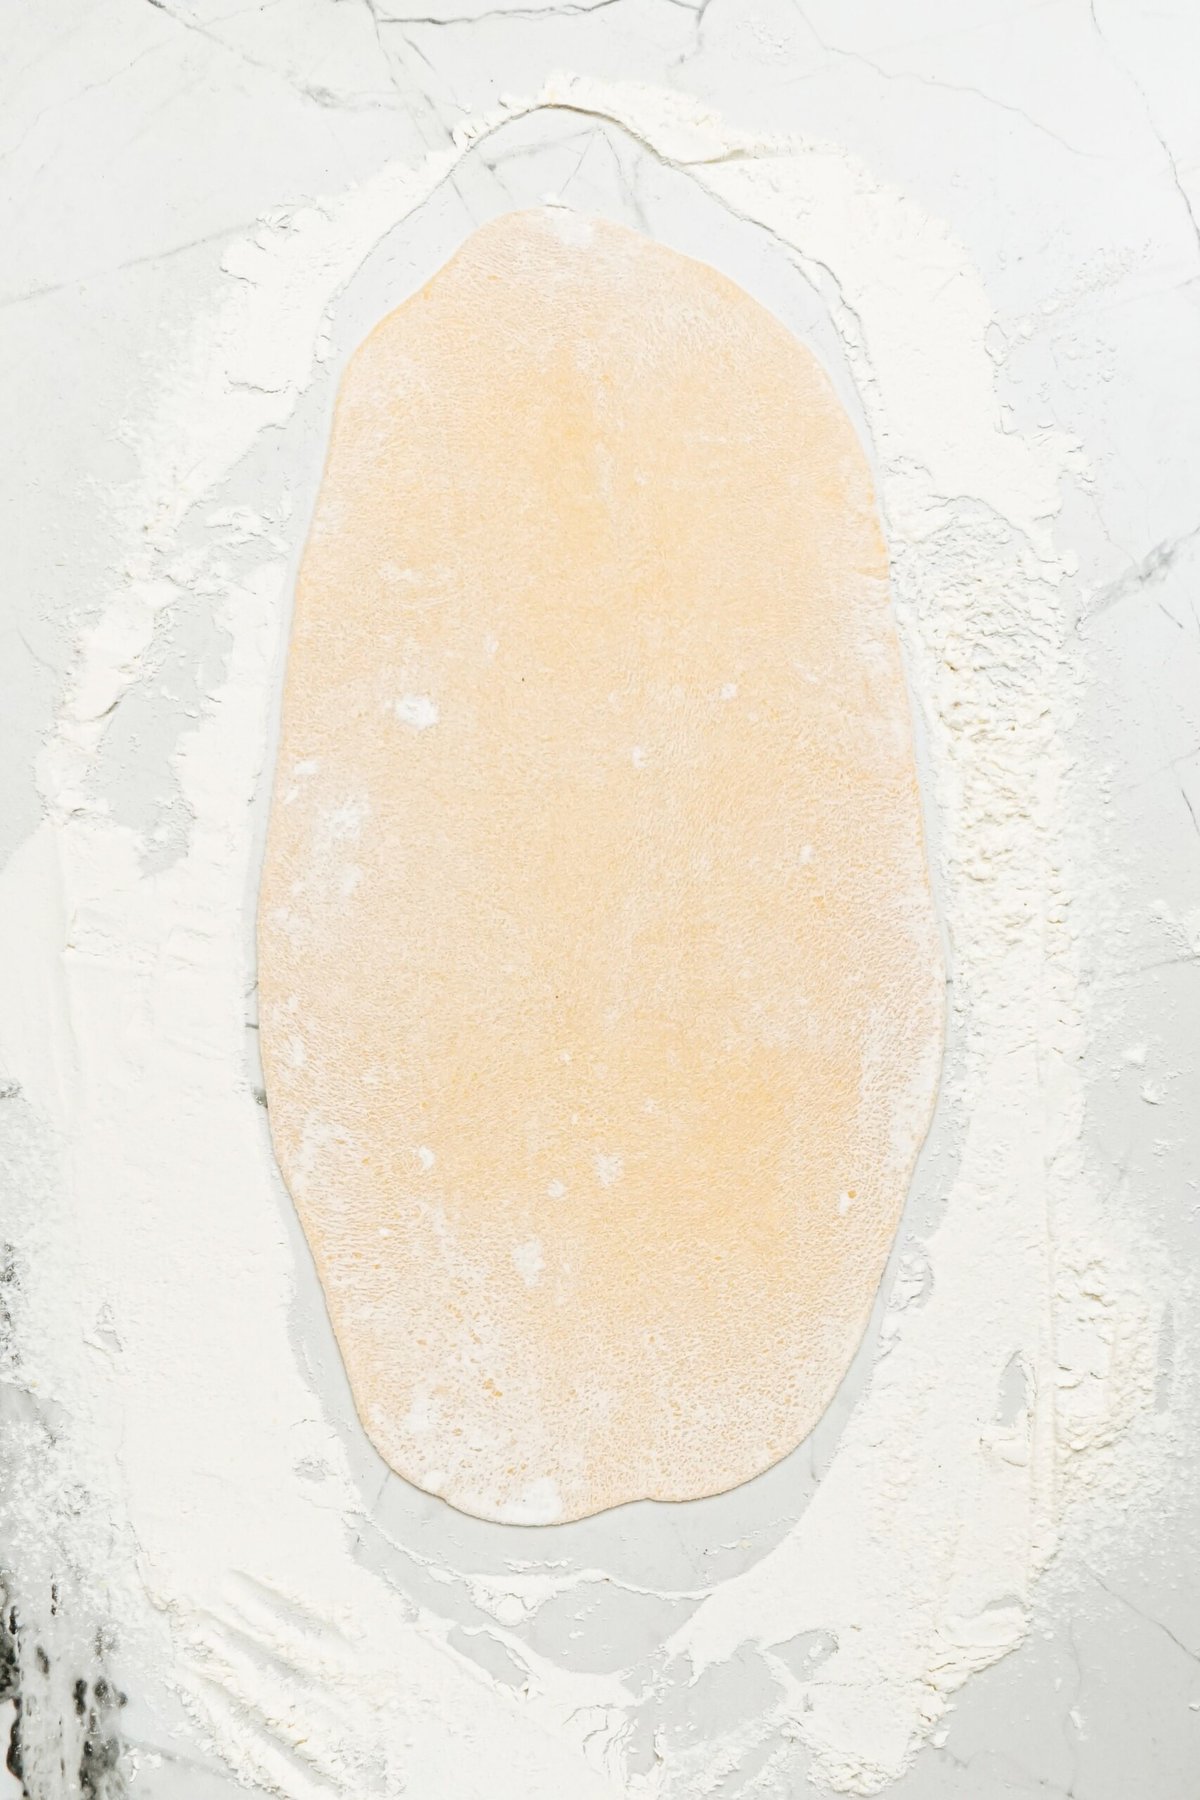 An image of a dough on a white surface.